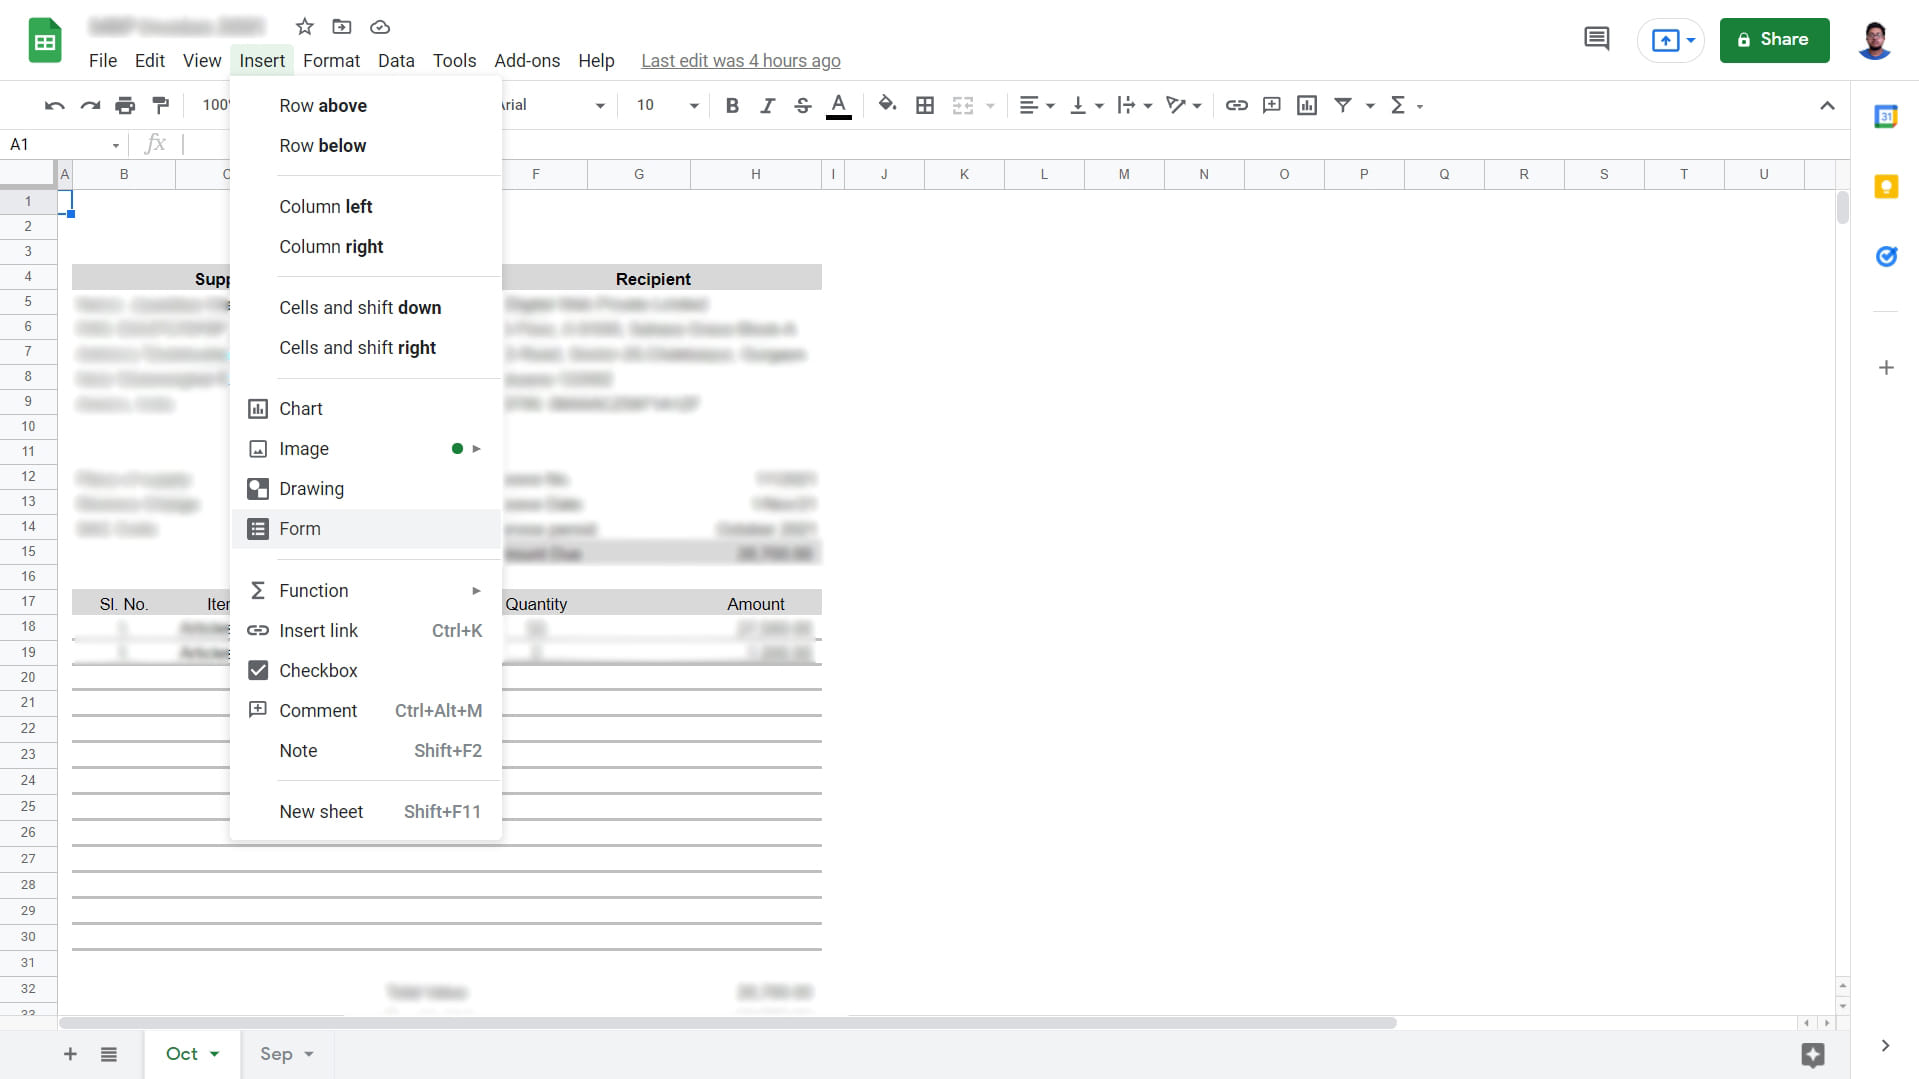 You can insert a form in a spreadsheet as well